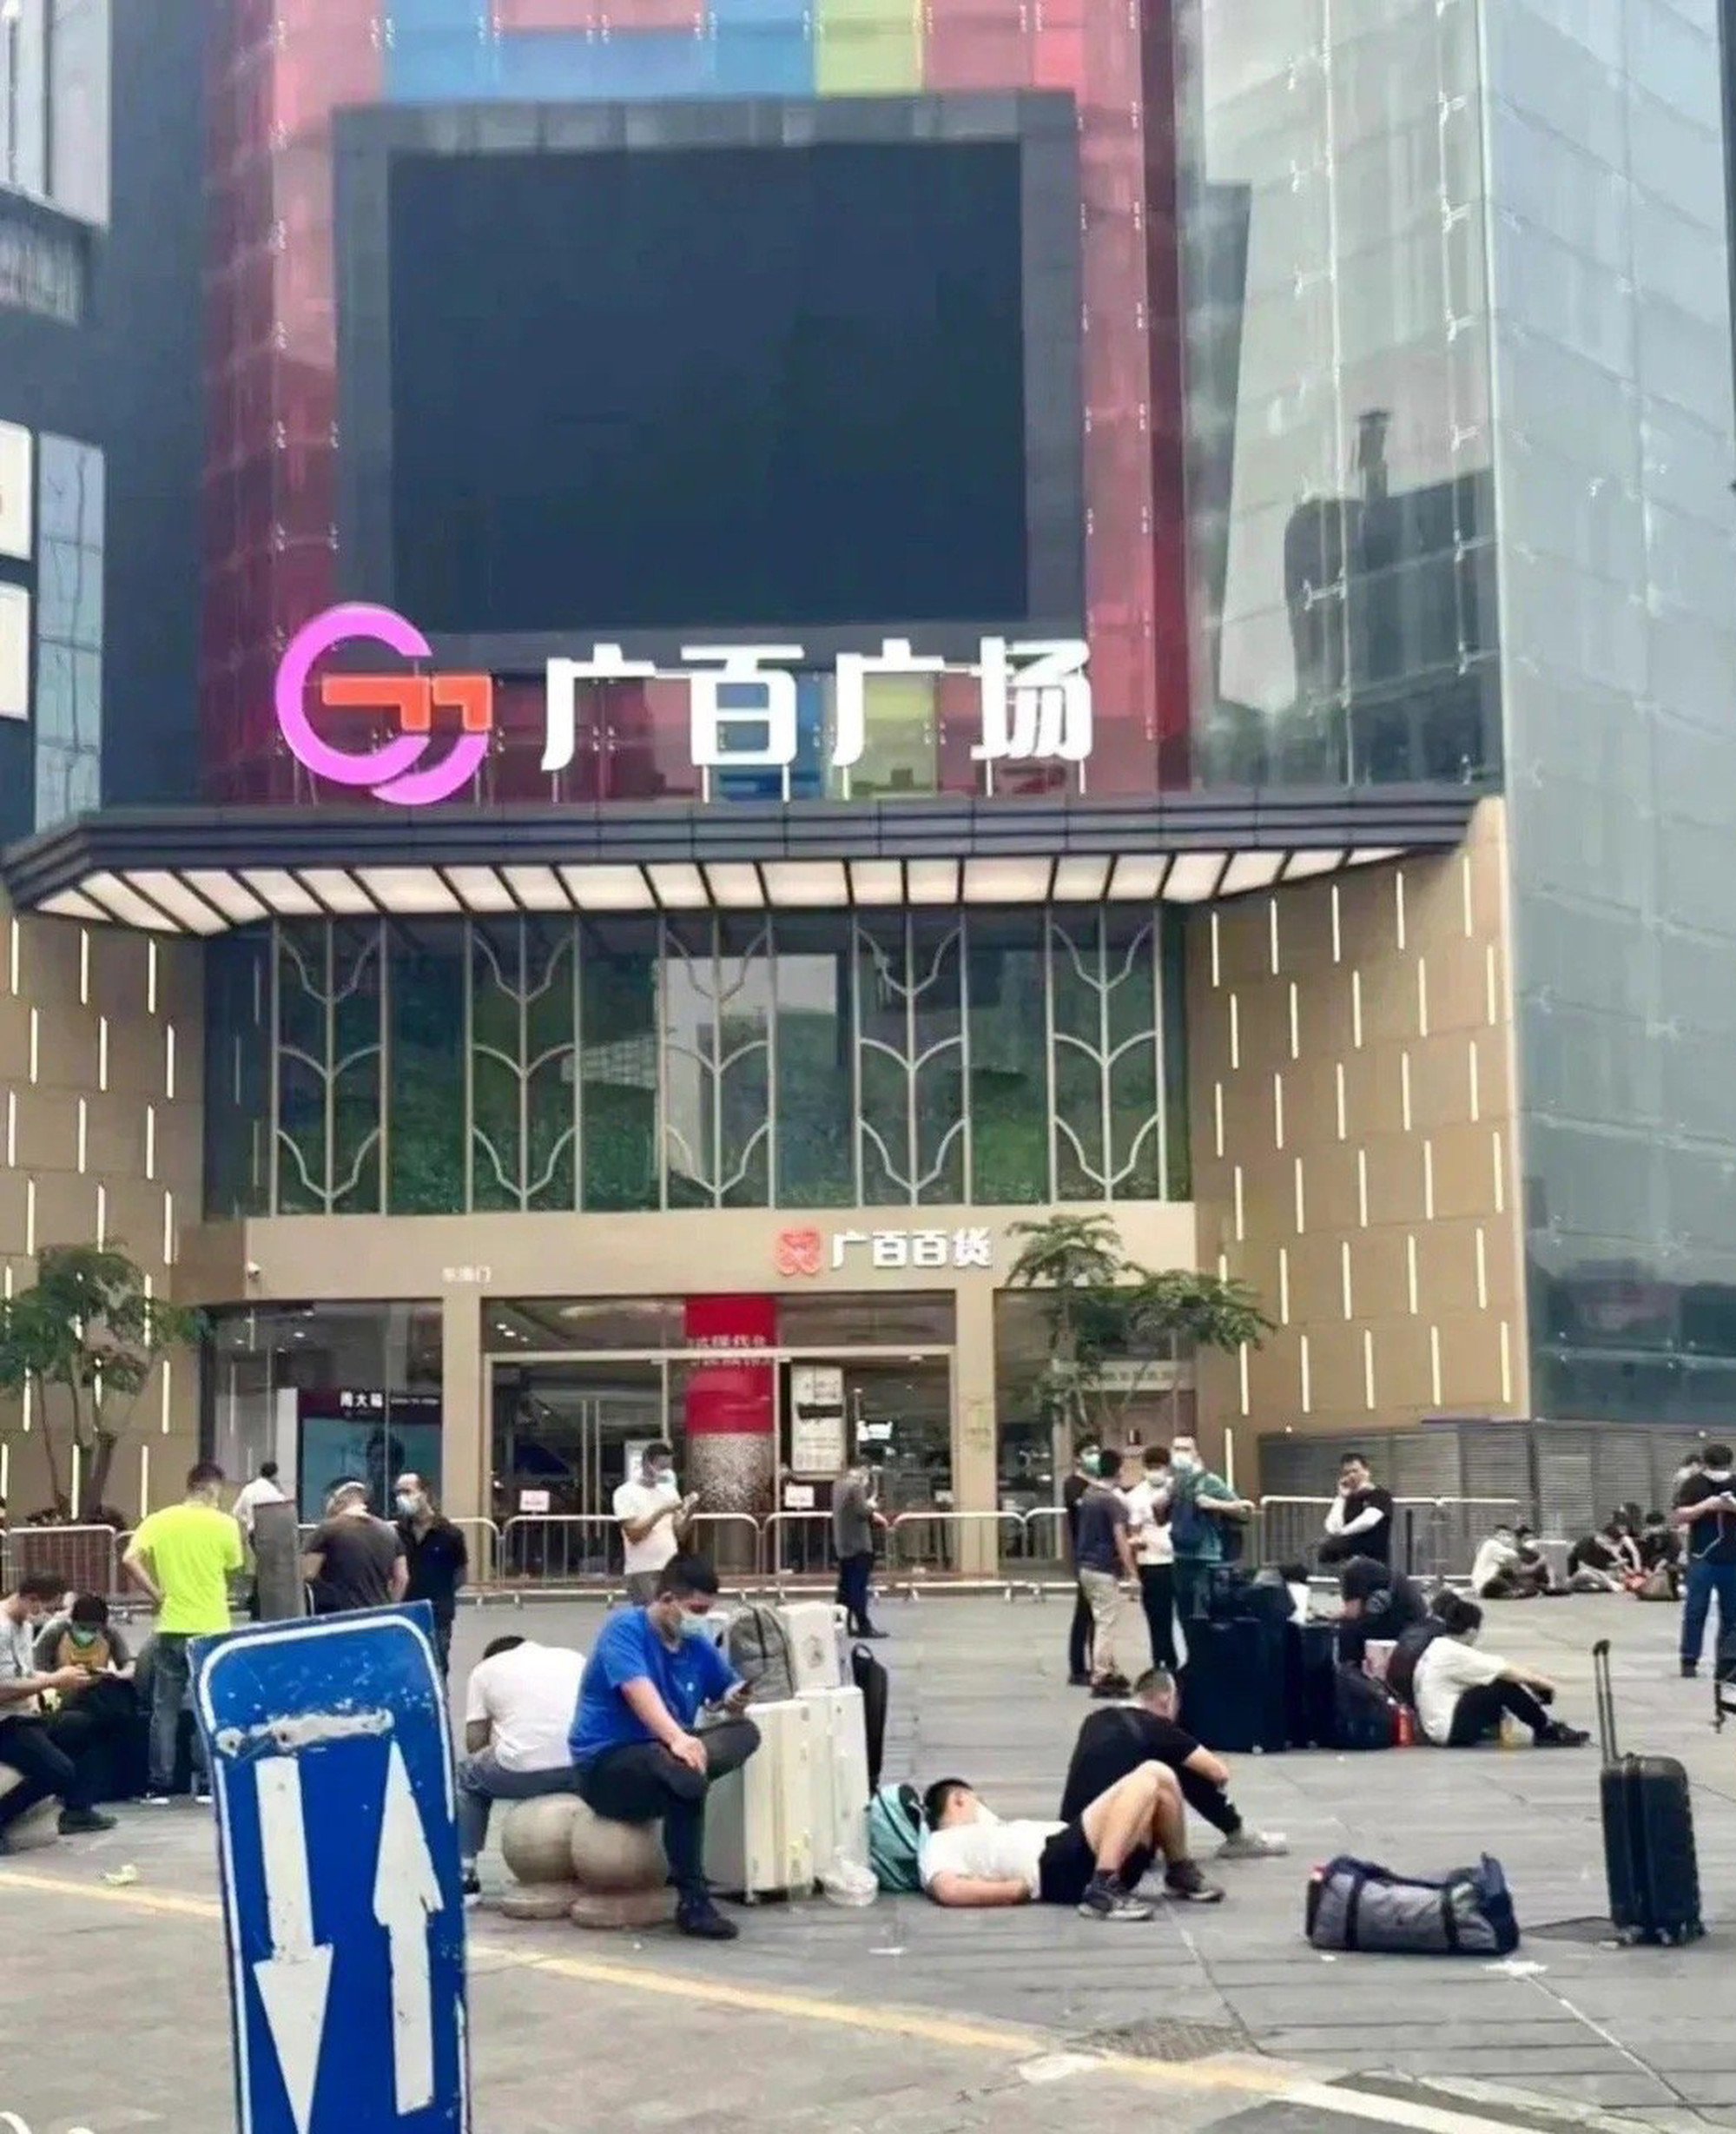 As Guangzhou battles its most severe outbreak of the Covid-19 pandemic, the city’s migrant workers are struggling to find supplies or even somewhere to stay. Photo: Weibo